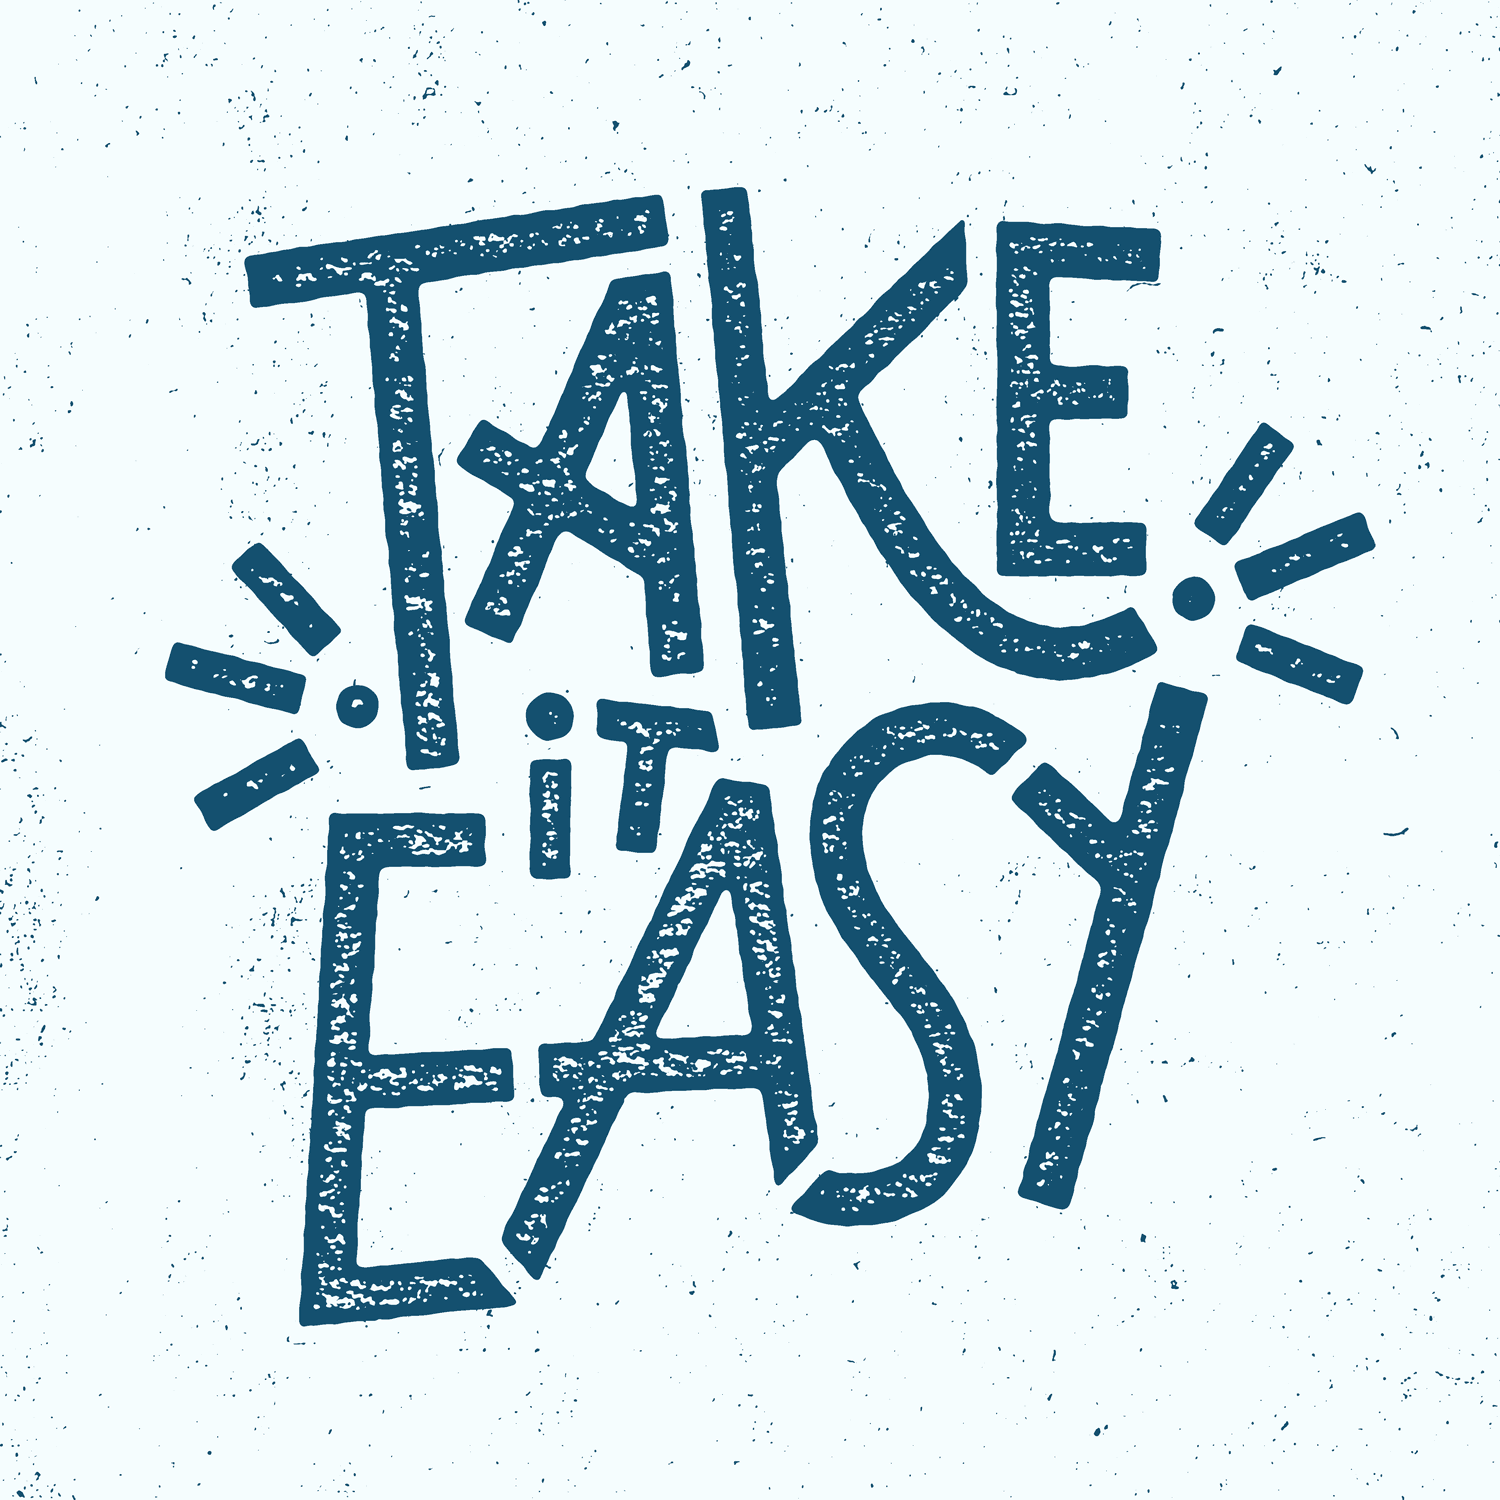 It was easy work. Take it easy. Take it easy обои. Картинка take it easy. It takes.